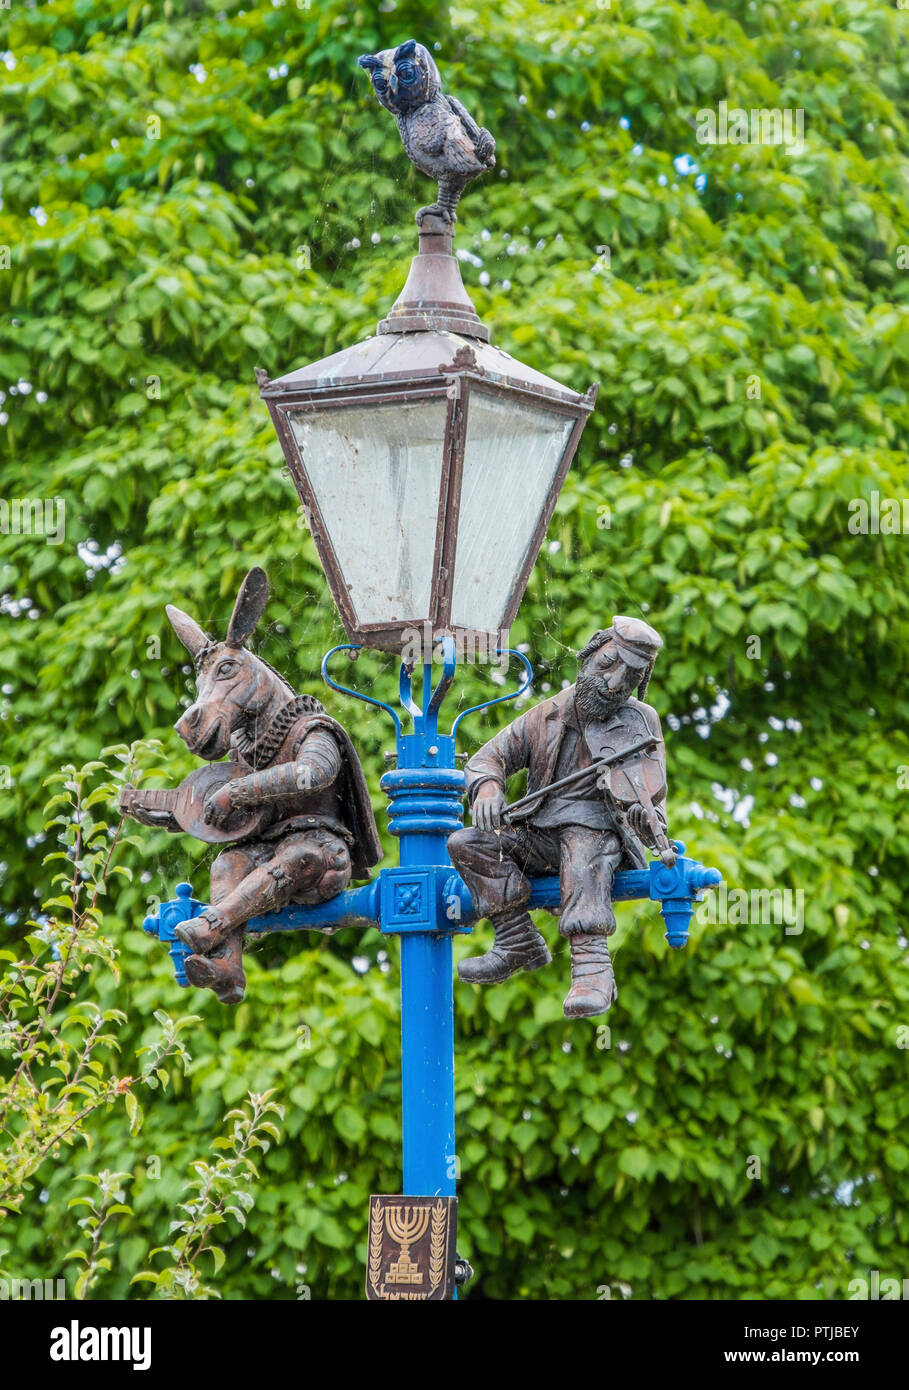 The Israeli Lamp in Stratford upon Avon features the characters Bottom and Topol as well as an owl. Stock Photo